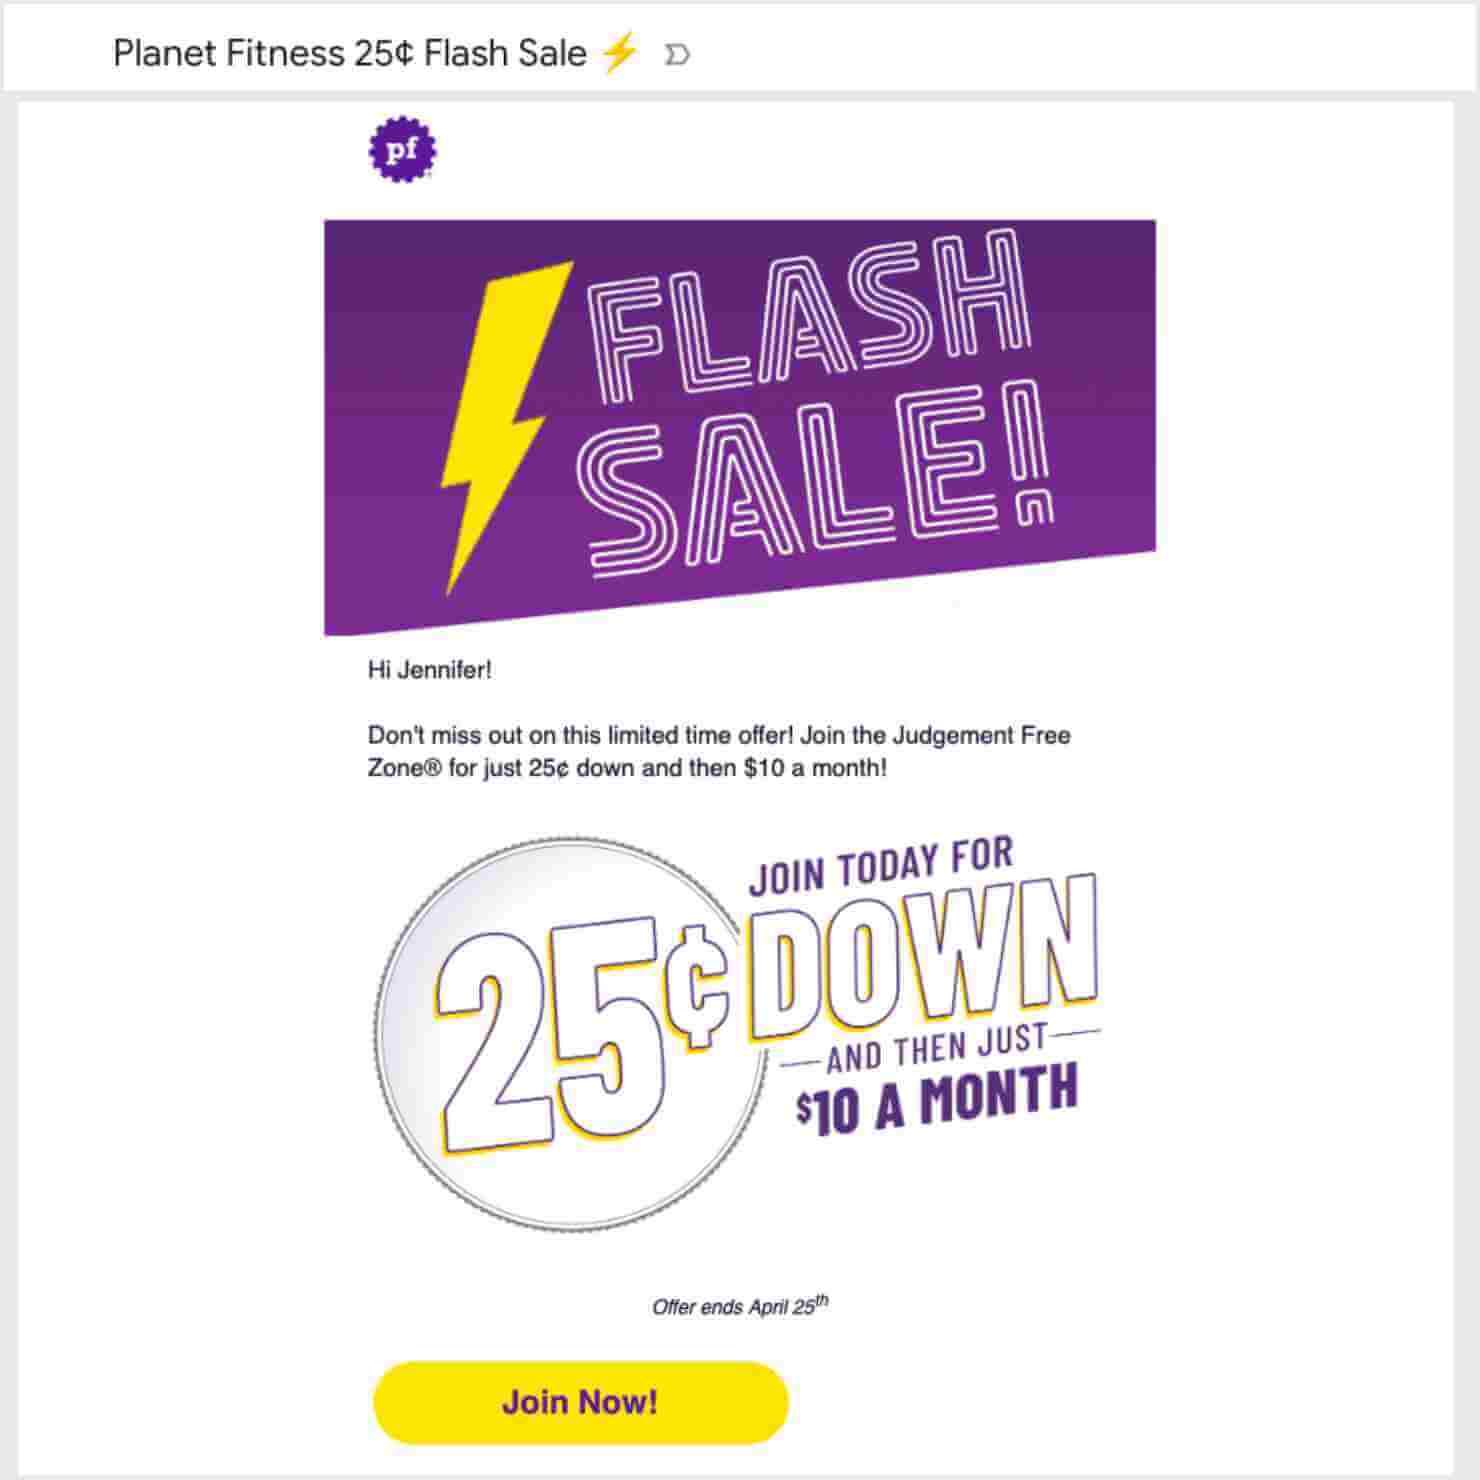 Flash sale example from Planet Fitness. Email subject line says "Planet Fitness 25¢ Flash Sale (lightning emoji". Details within the email include, "Don't miss out o this limited time offer! Join the Judgement Free Zone for just 25¢ down and then $10 a month! Offer ends April 25."